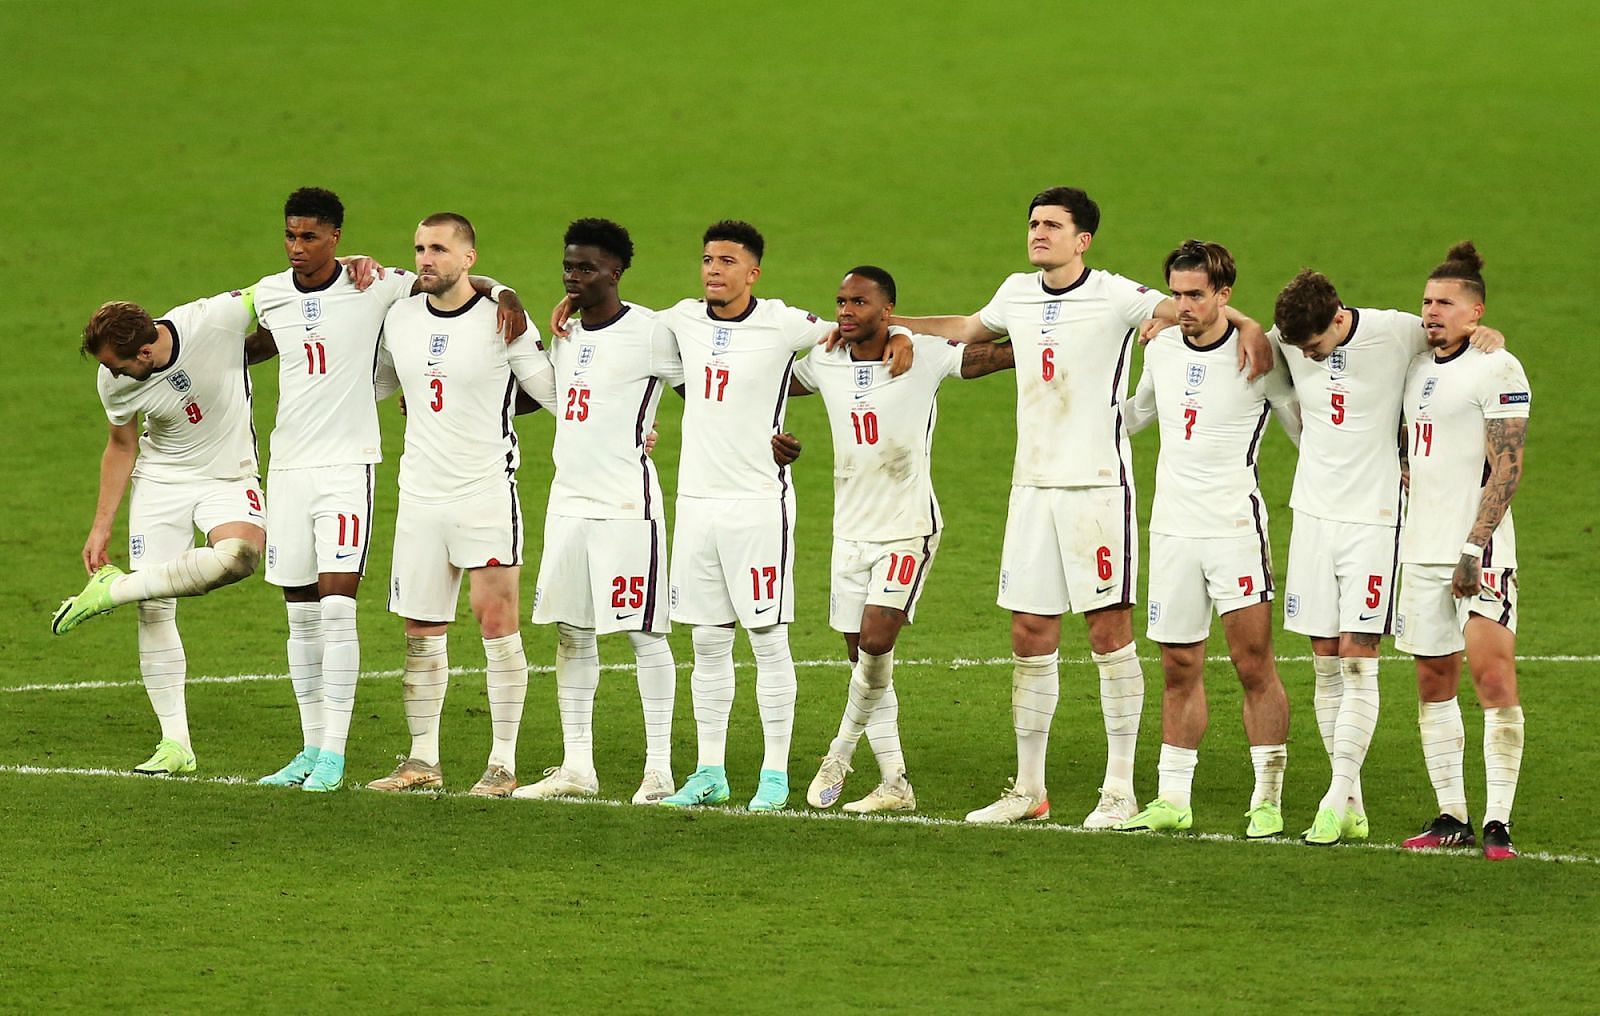 England squad for FIFA World Cup 2022 Player list, Age, Total wins